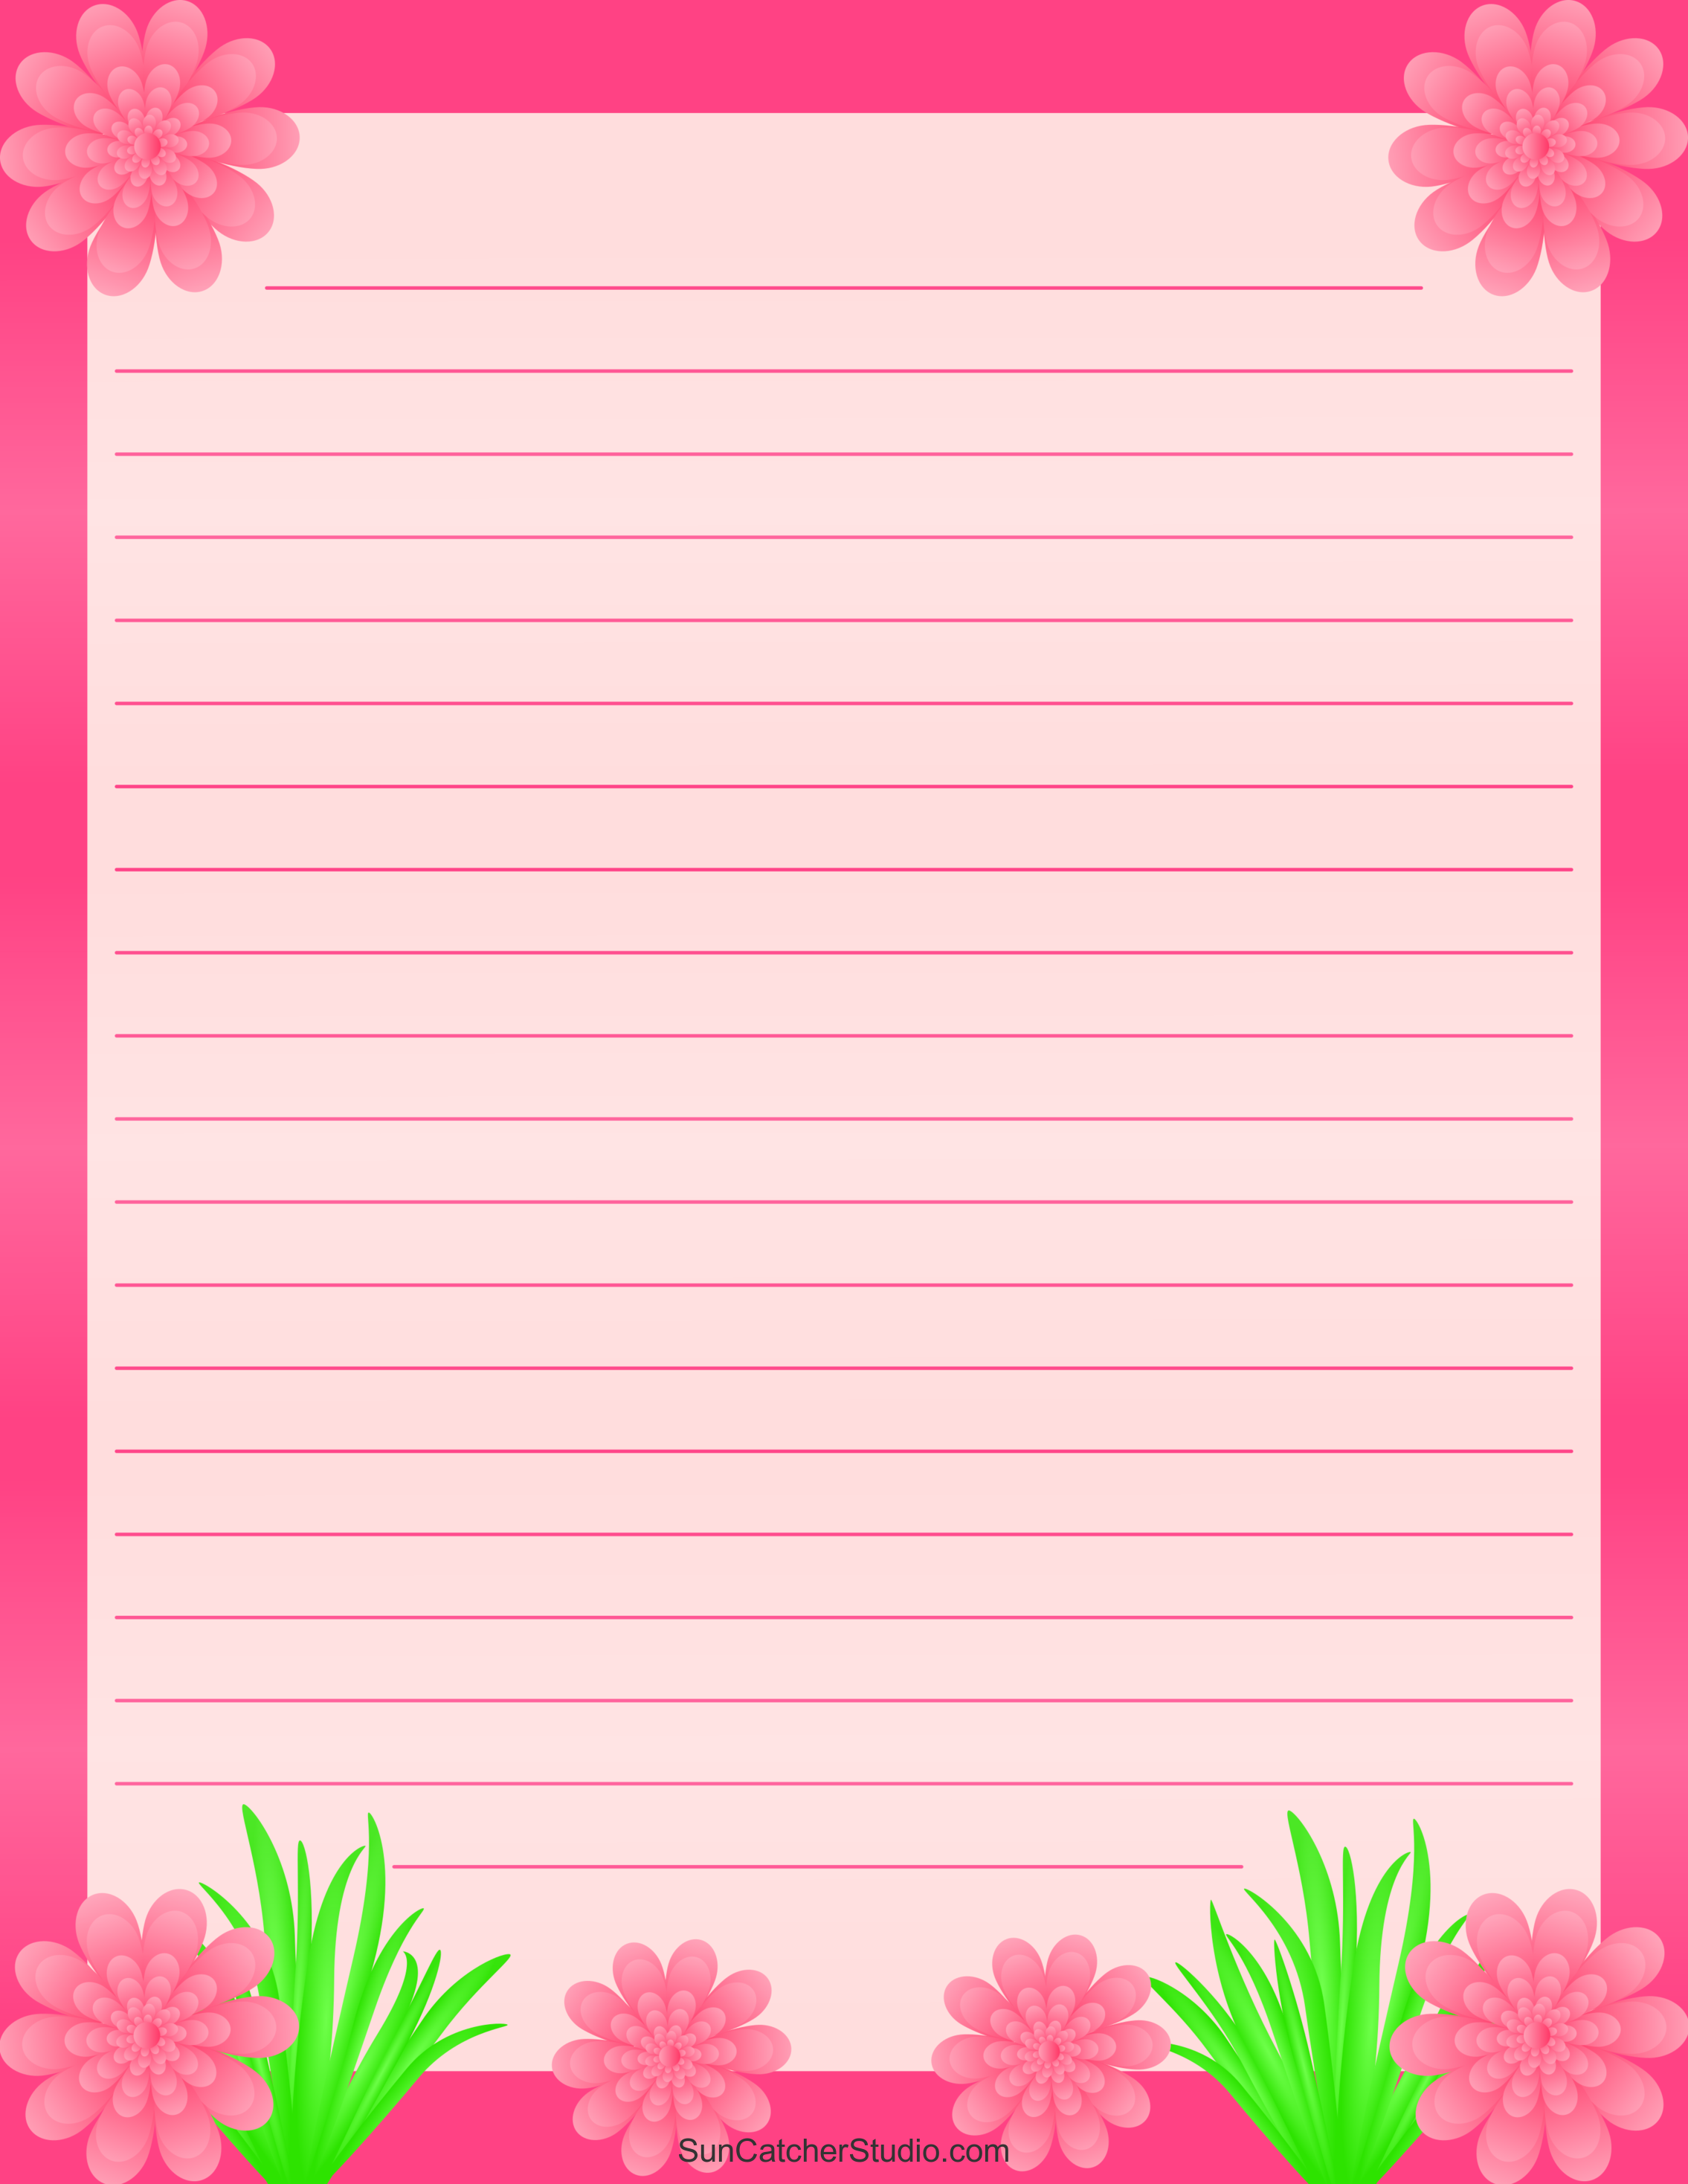 Free Printable Stationery and Lined Letter Writing Paper – DIY Projects,  Patterns, Monograms, Designs, Templates